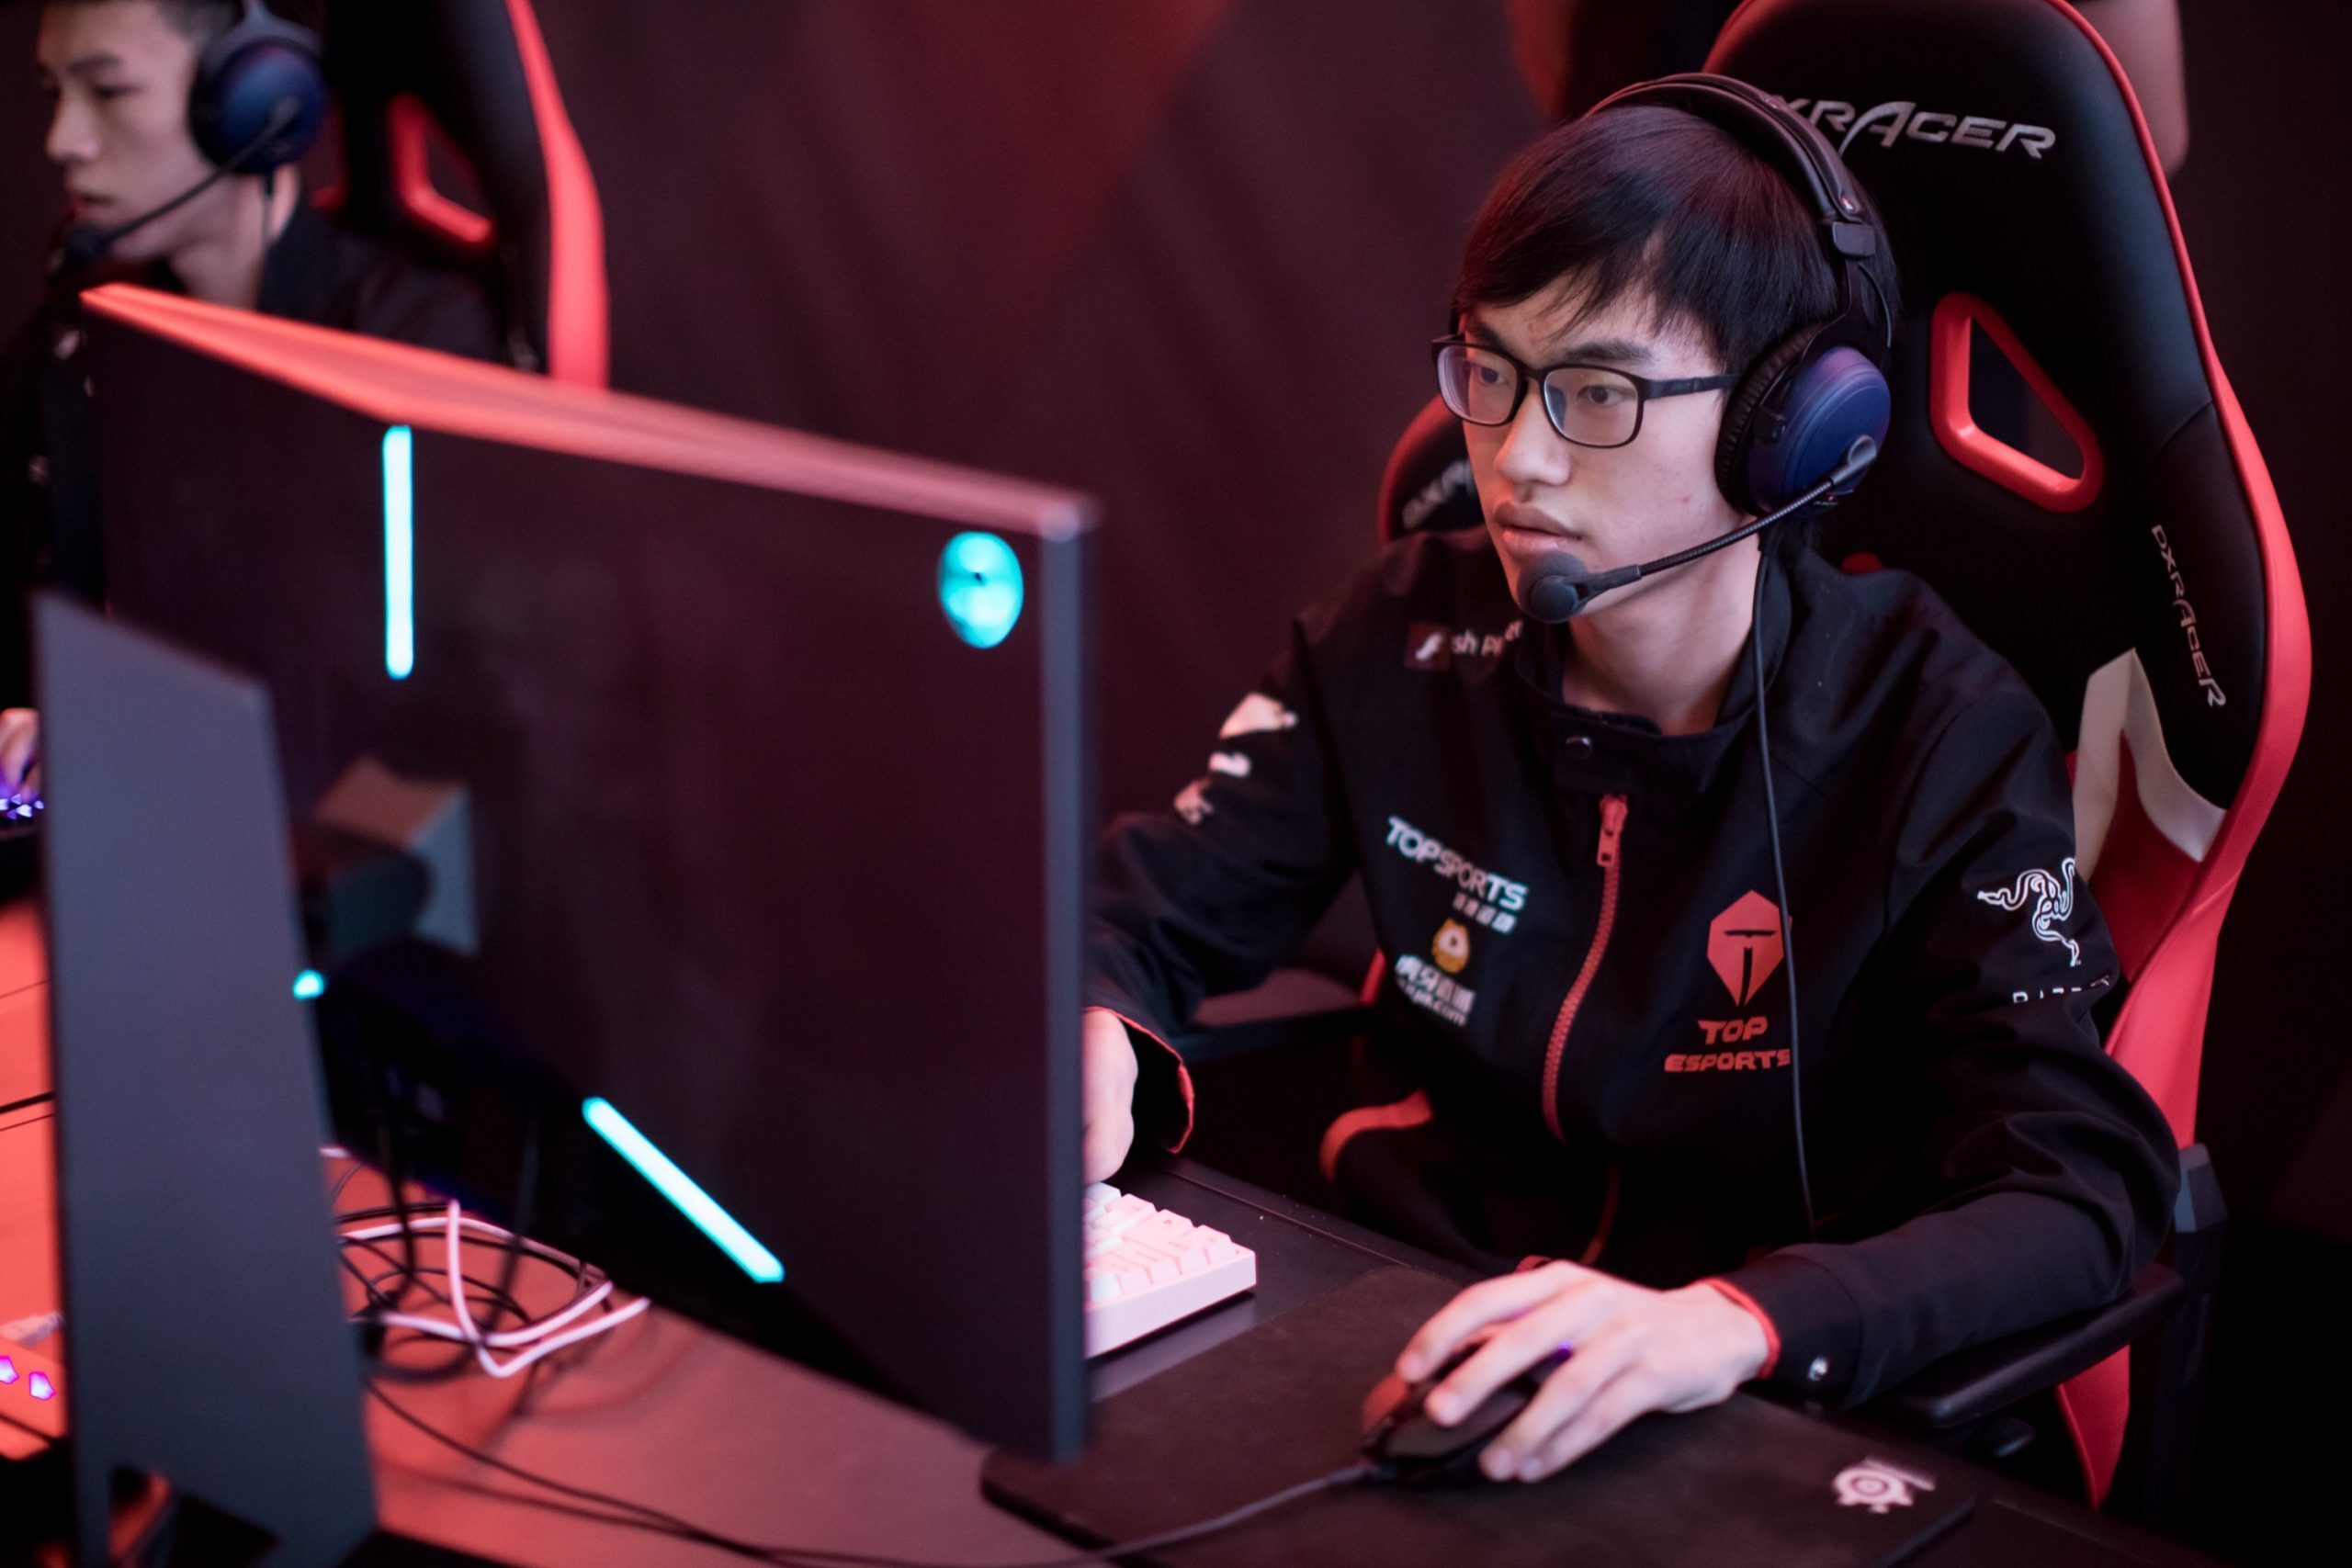 Top Esports compete for LPL spot at Worlds